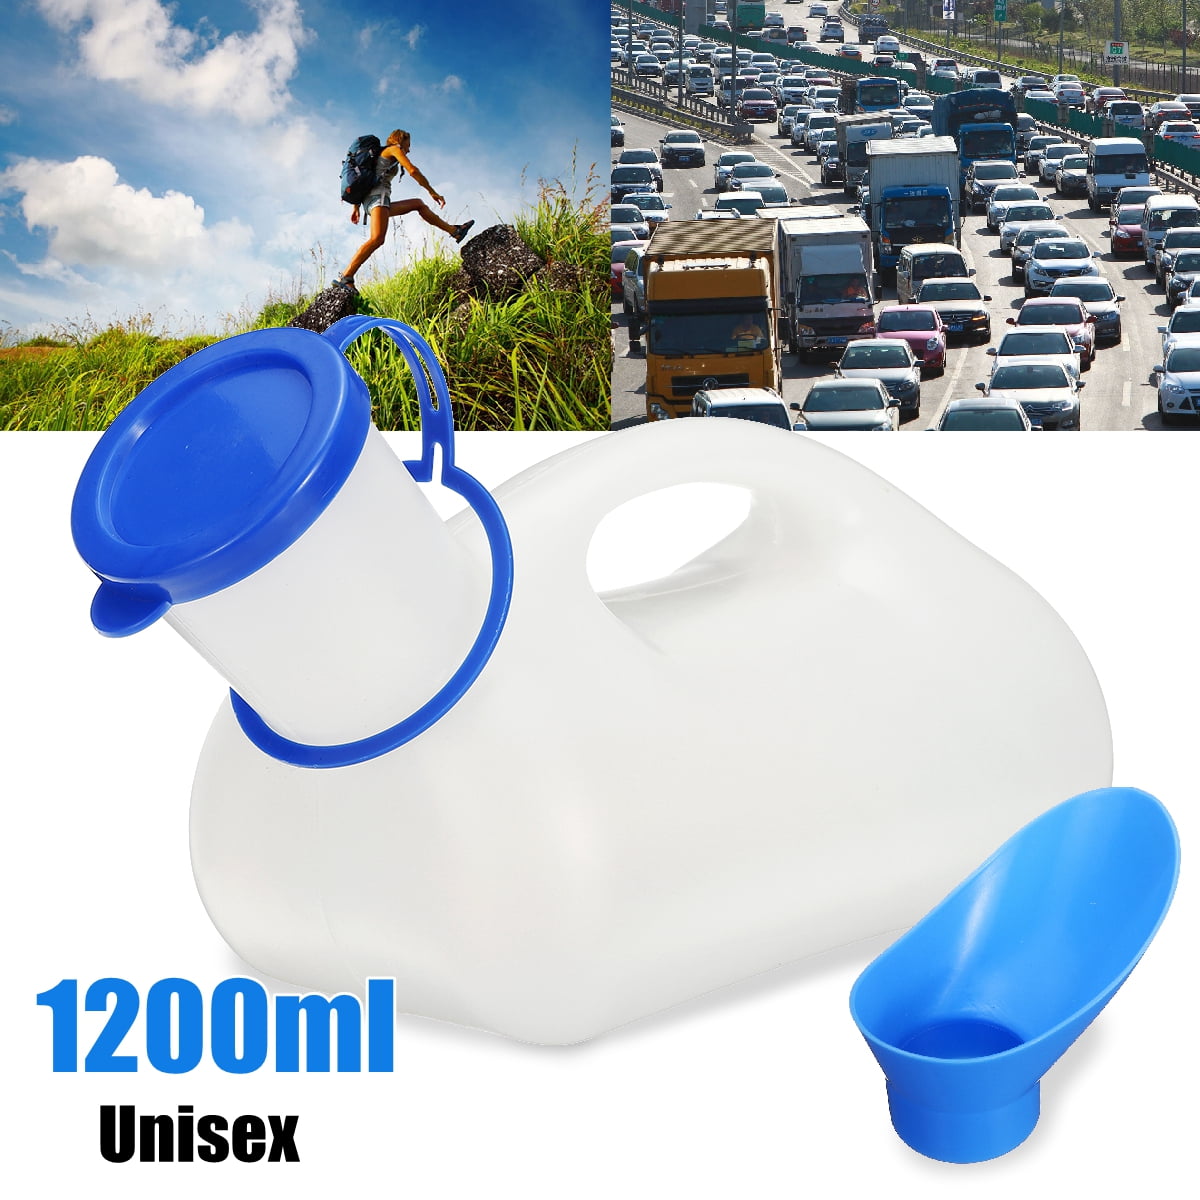 Traffic Jam Camping Grey for Travel EORTA 2 Pieces Portable Urinals Unisex Urination Device Emergency Pee Funnels Mini Reusable Washable Toilet for Female Women Male Outdoor